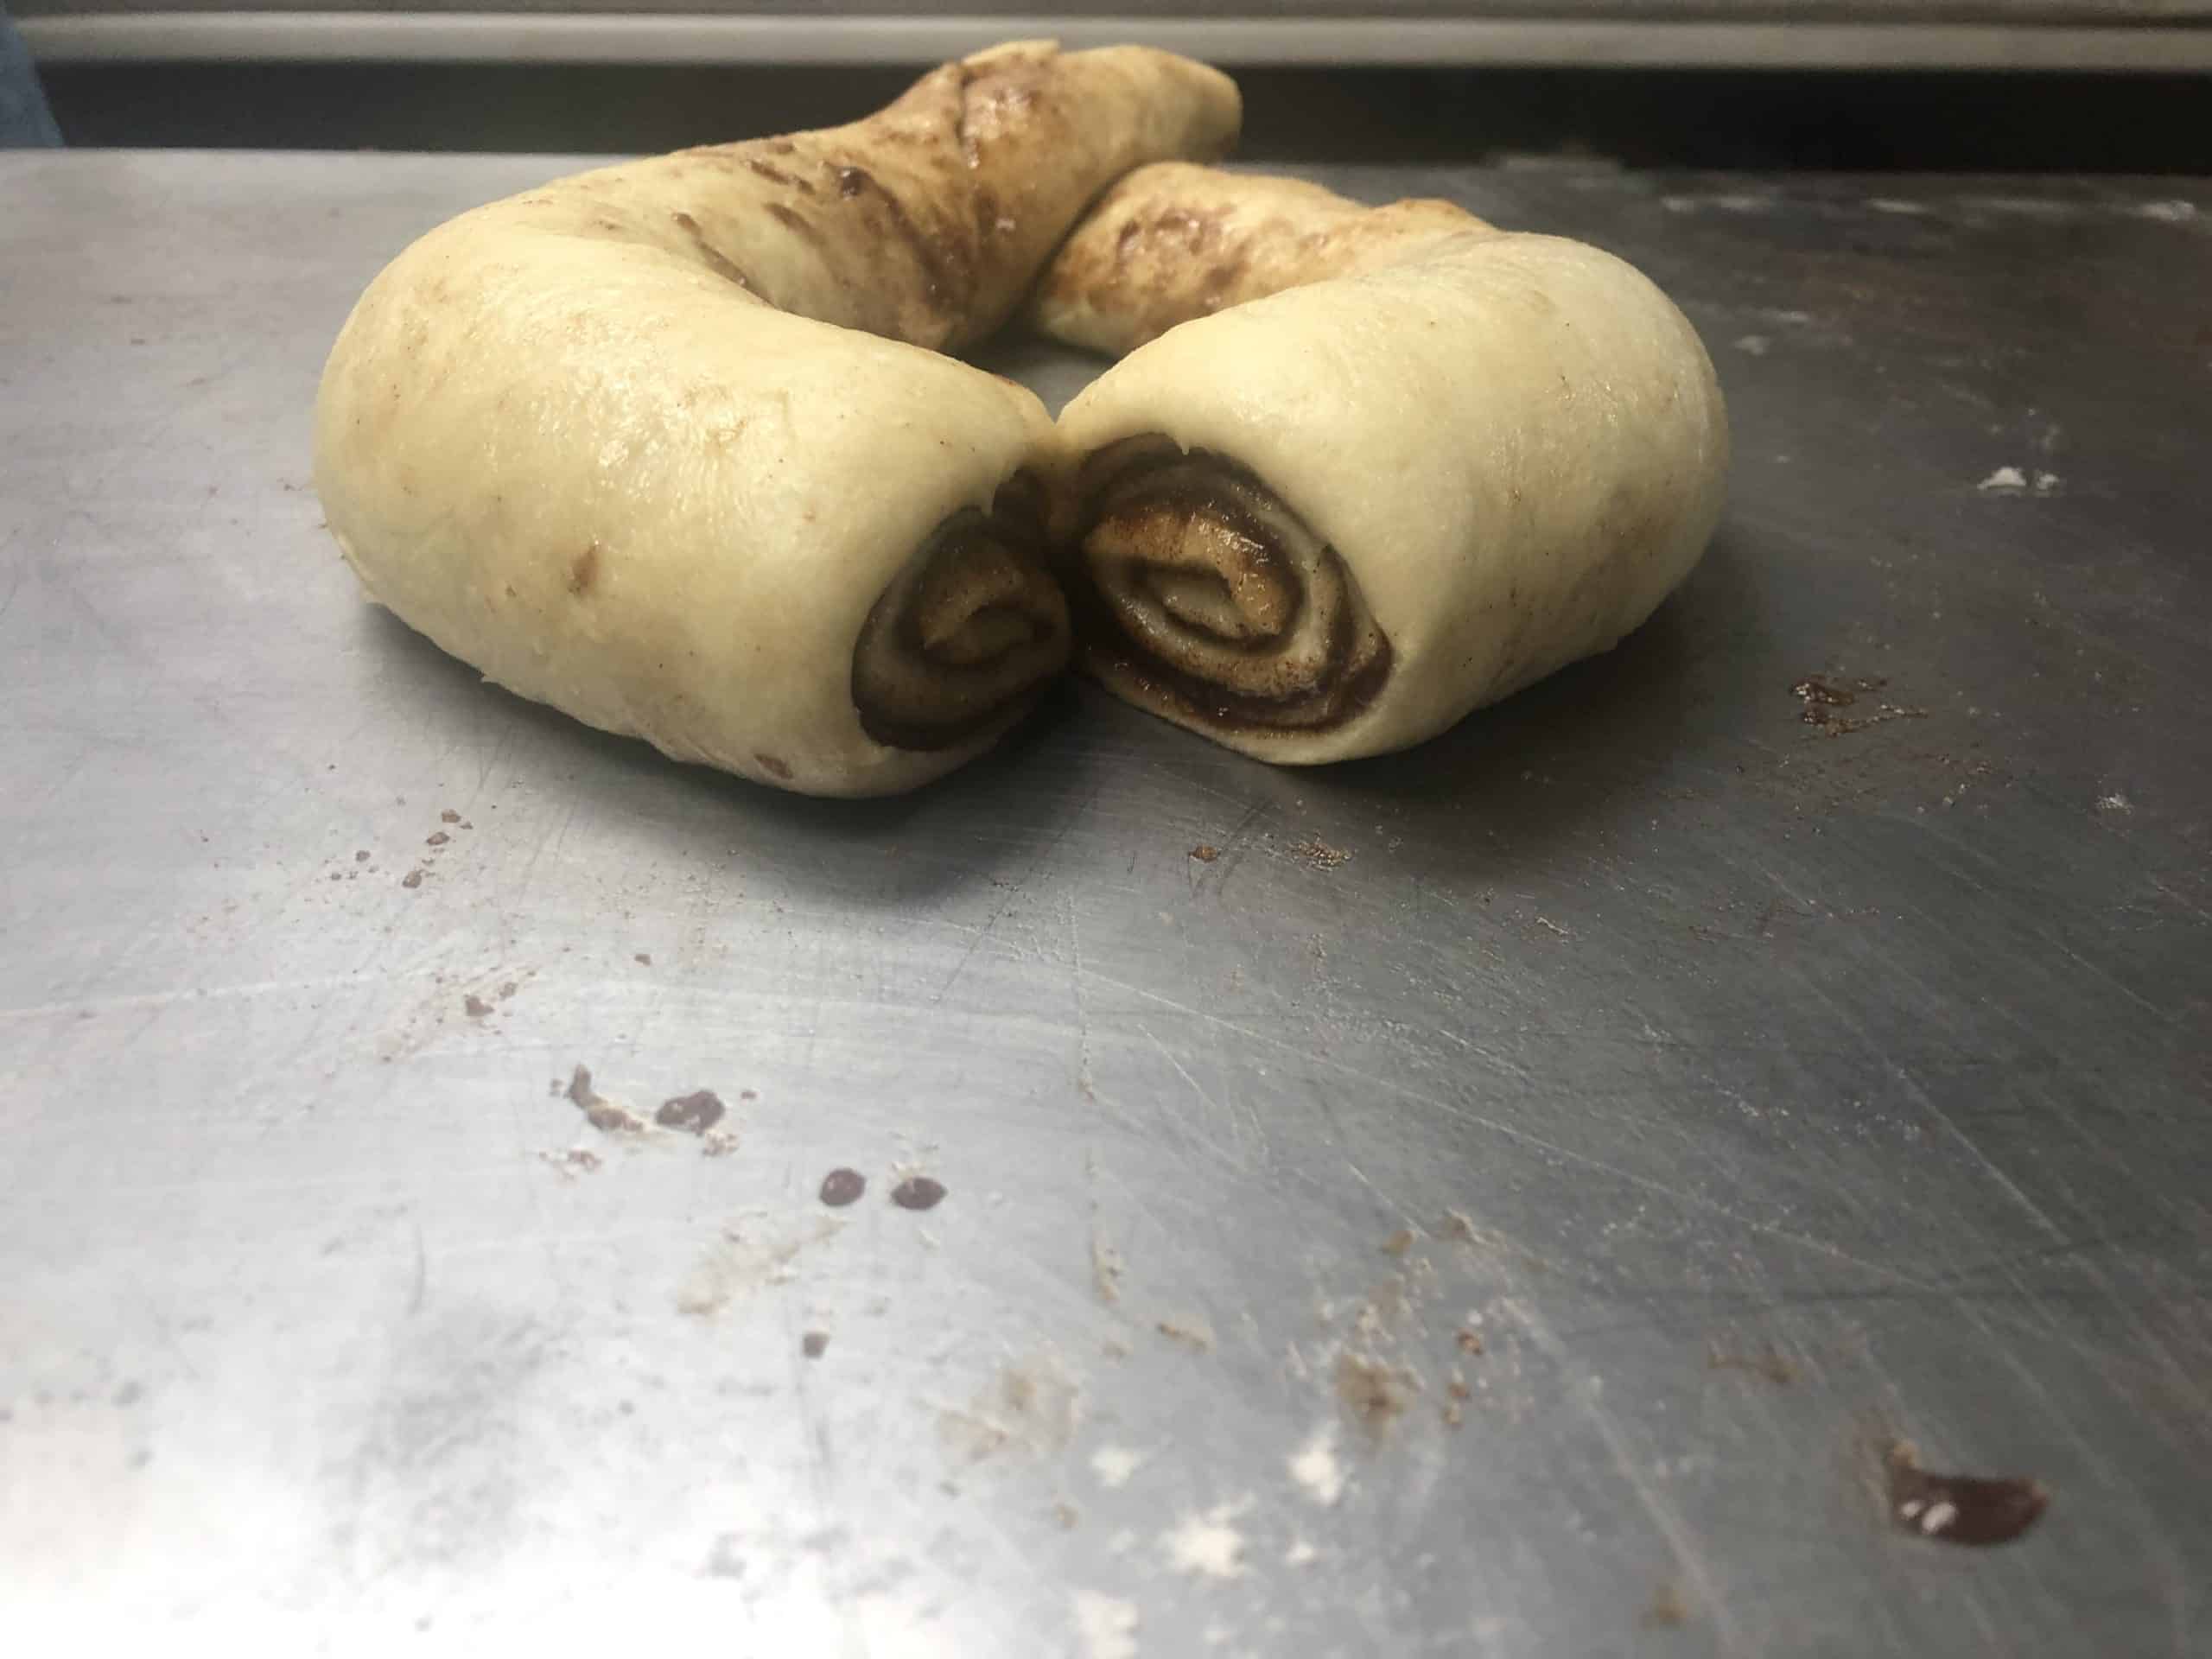 A rolled cinnamon babke which will then be folded into a baking tin.